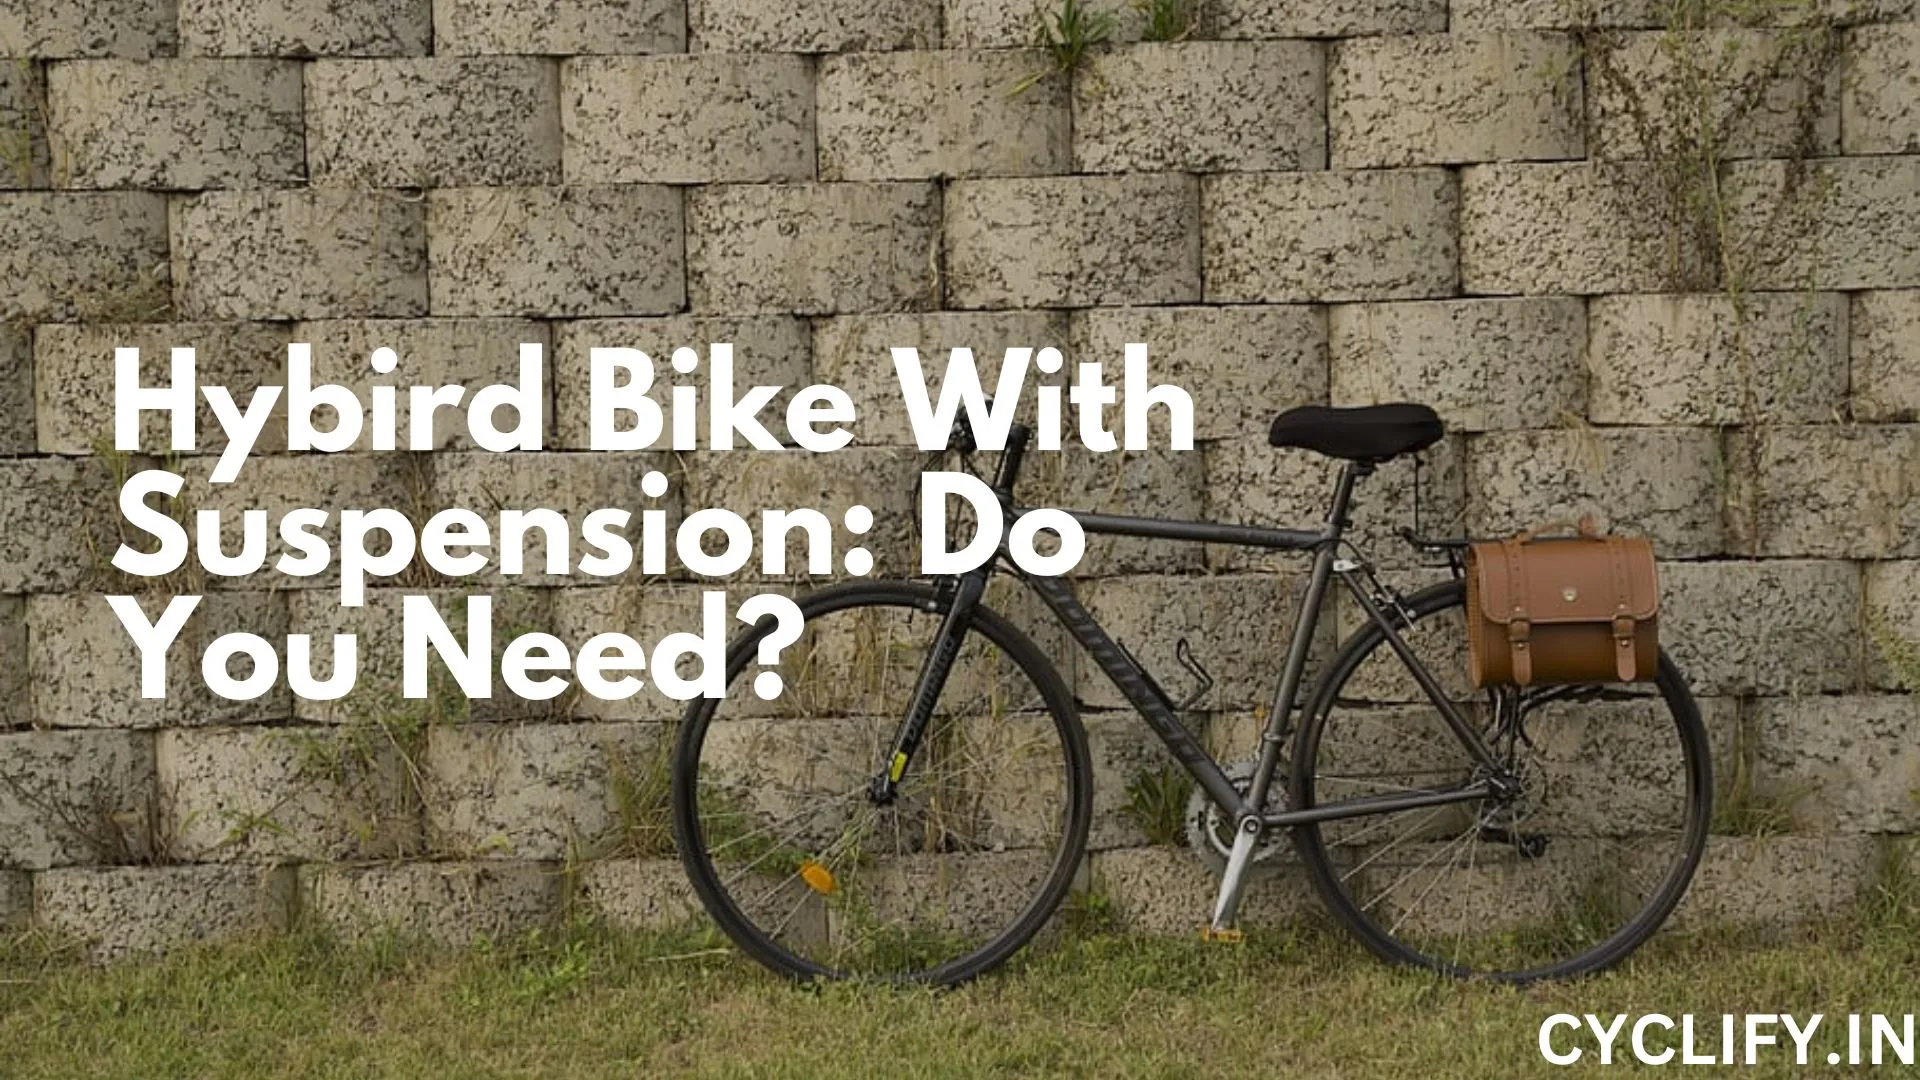 Do you really need suspensions on a hybrid bike